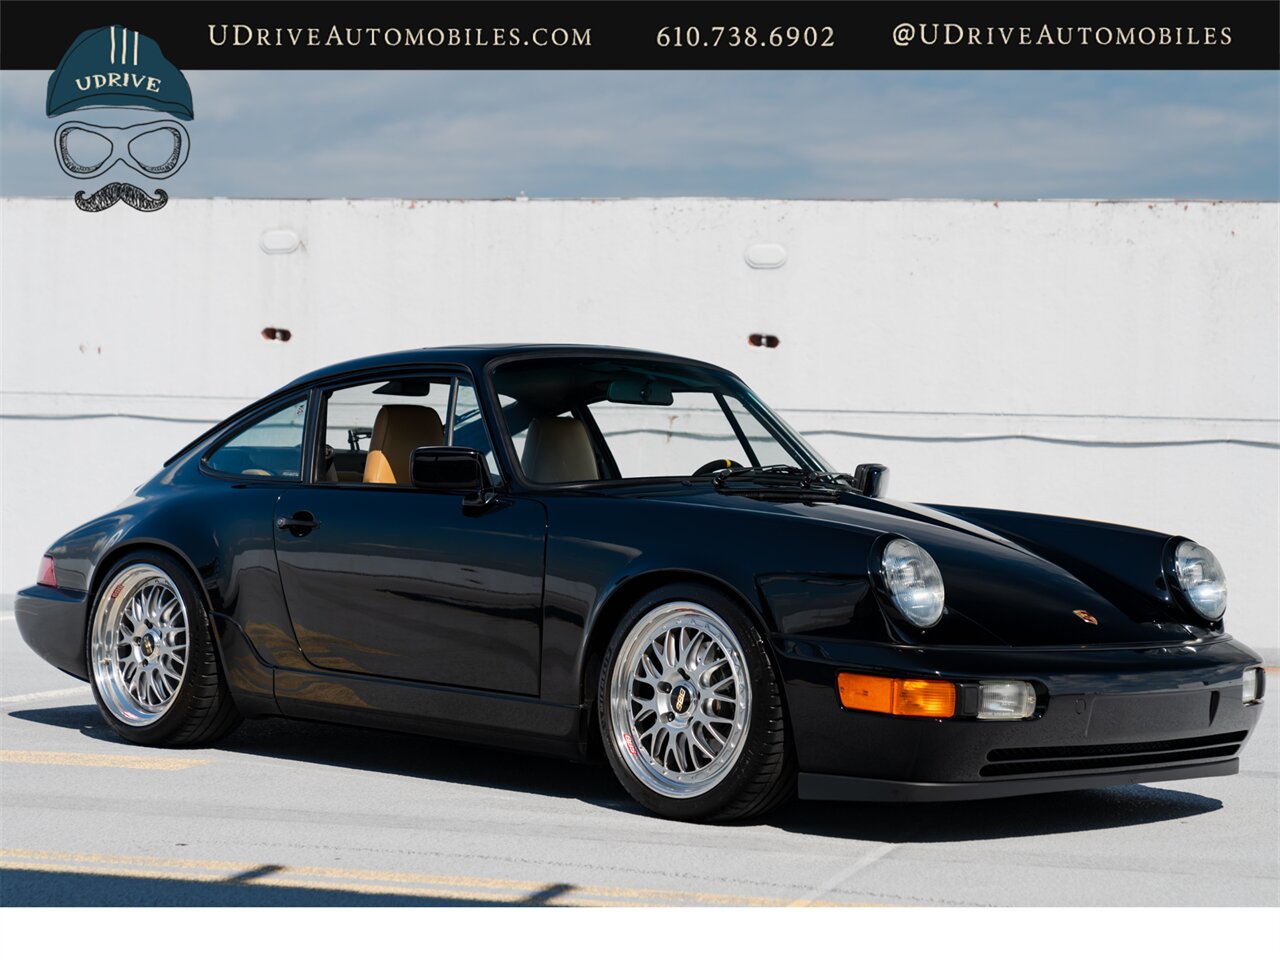 1989 Porsche 911 Carrera 4  964 C4 5 Speed Manual $63k Recent Service and Upgrades - Photo 18 - West Chester, PA 19382